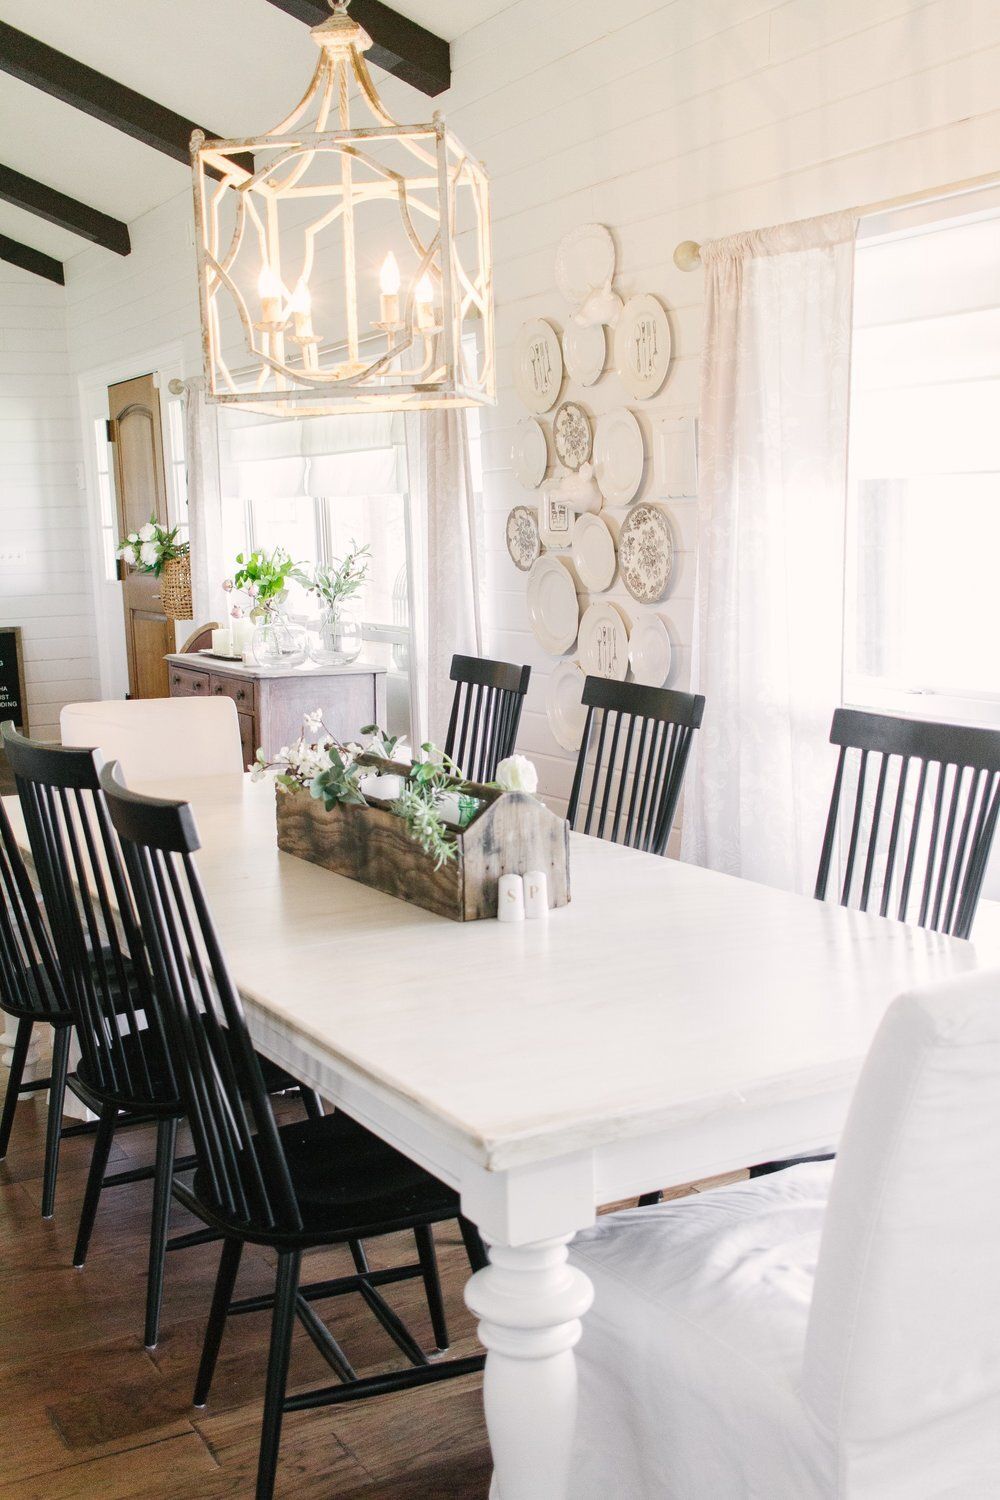 Affordable Chic White Dining Room Table